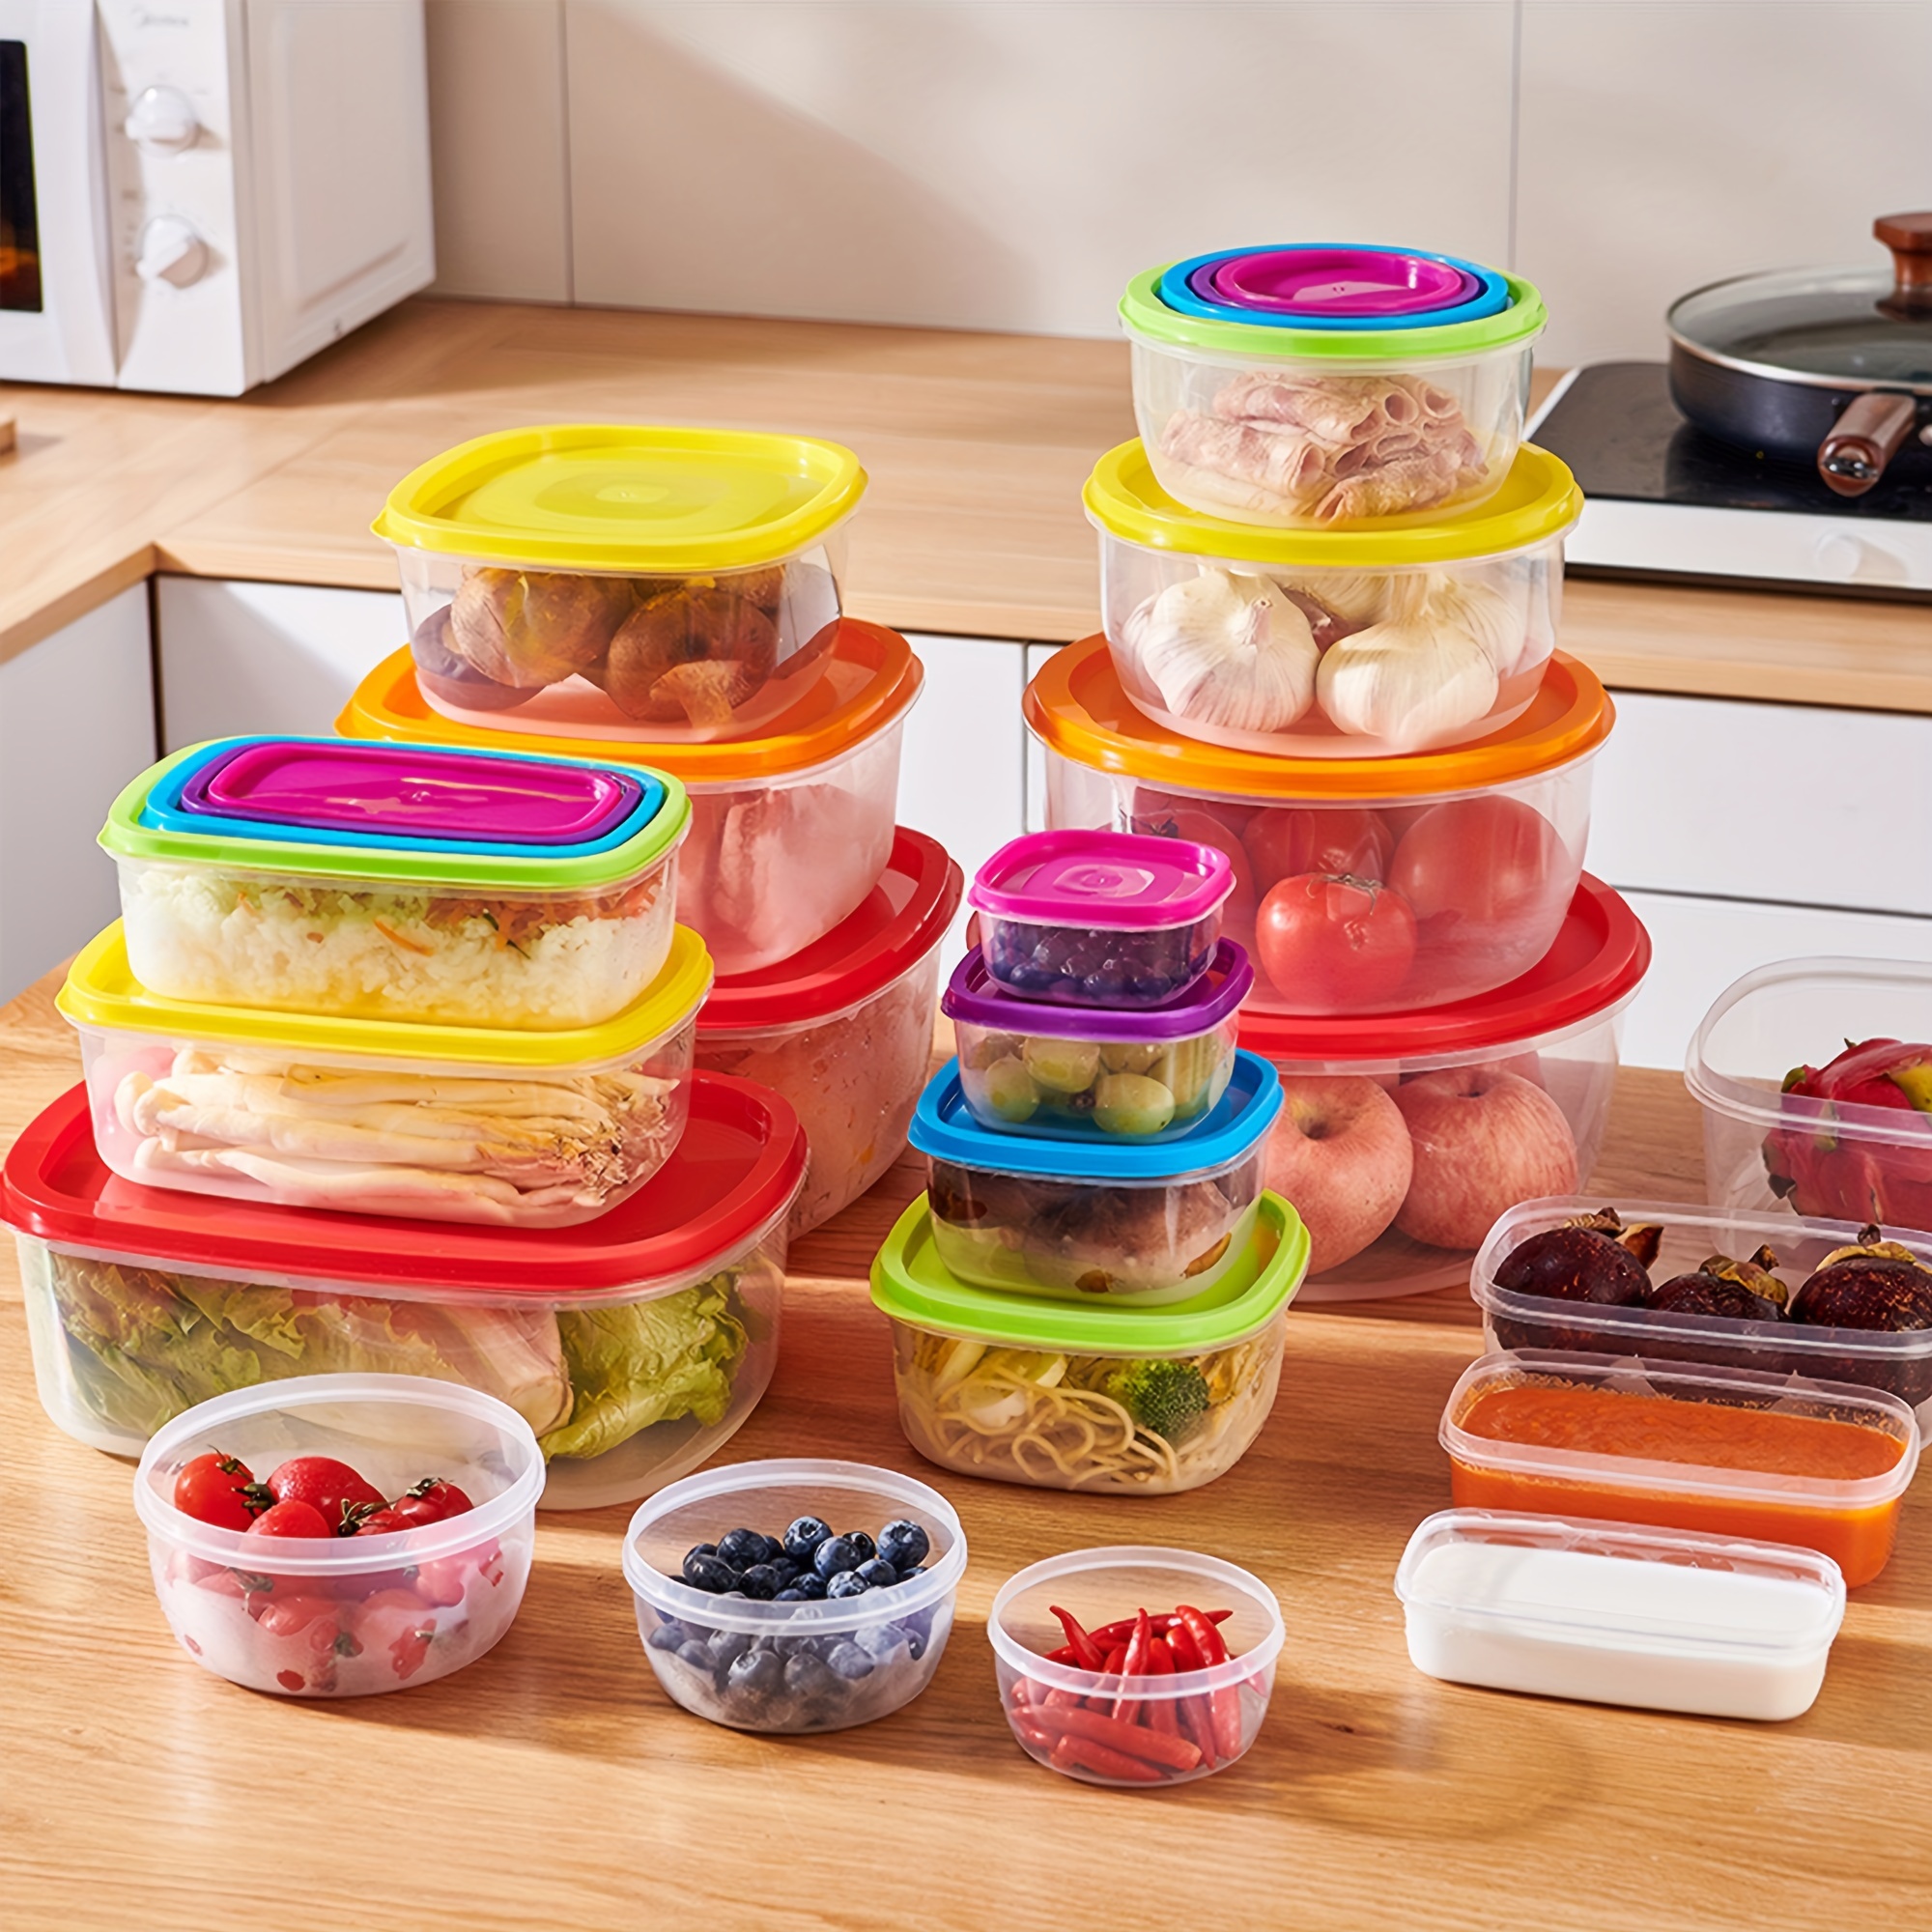 Bento box meal prep containers - 5 Leak Proof Lunch Box